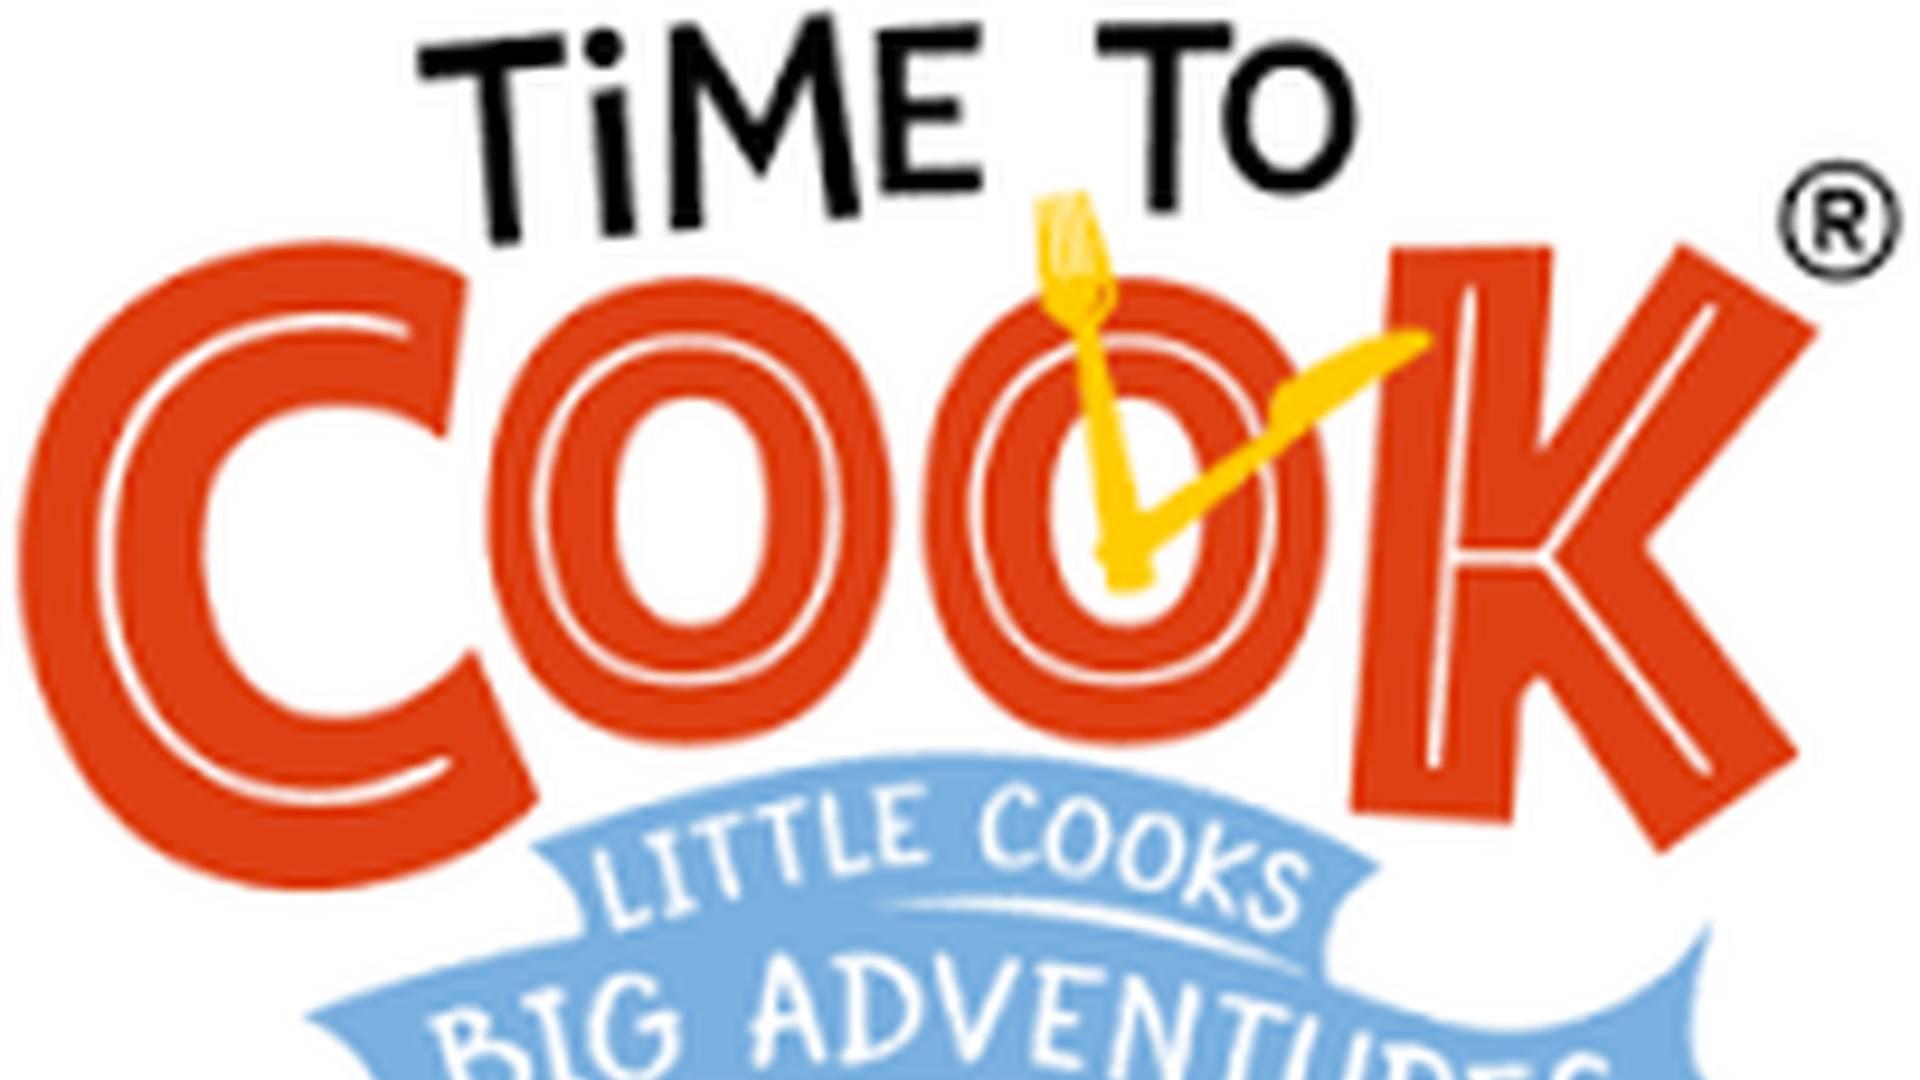 Time To Cook - Preschooler Session at World of Wonder photo